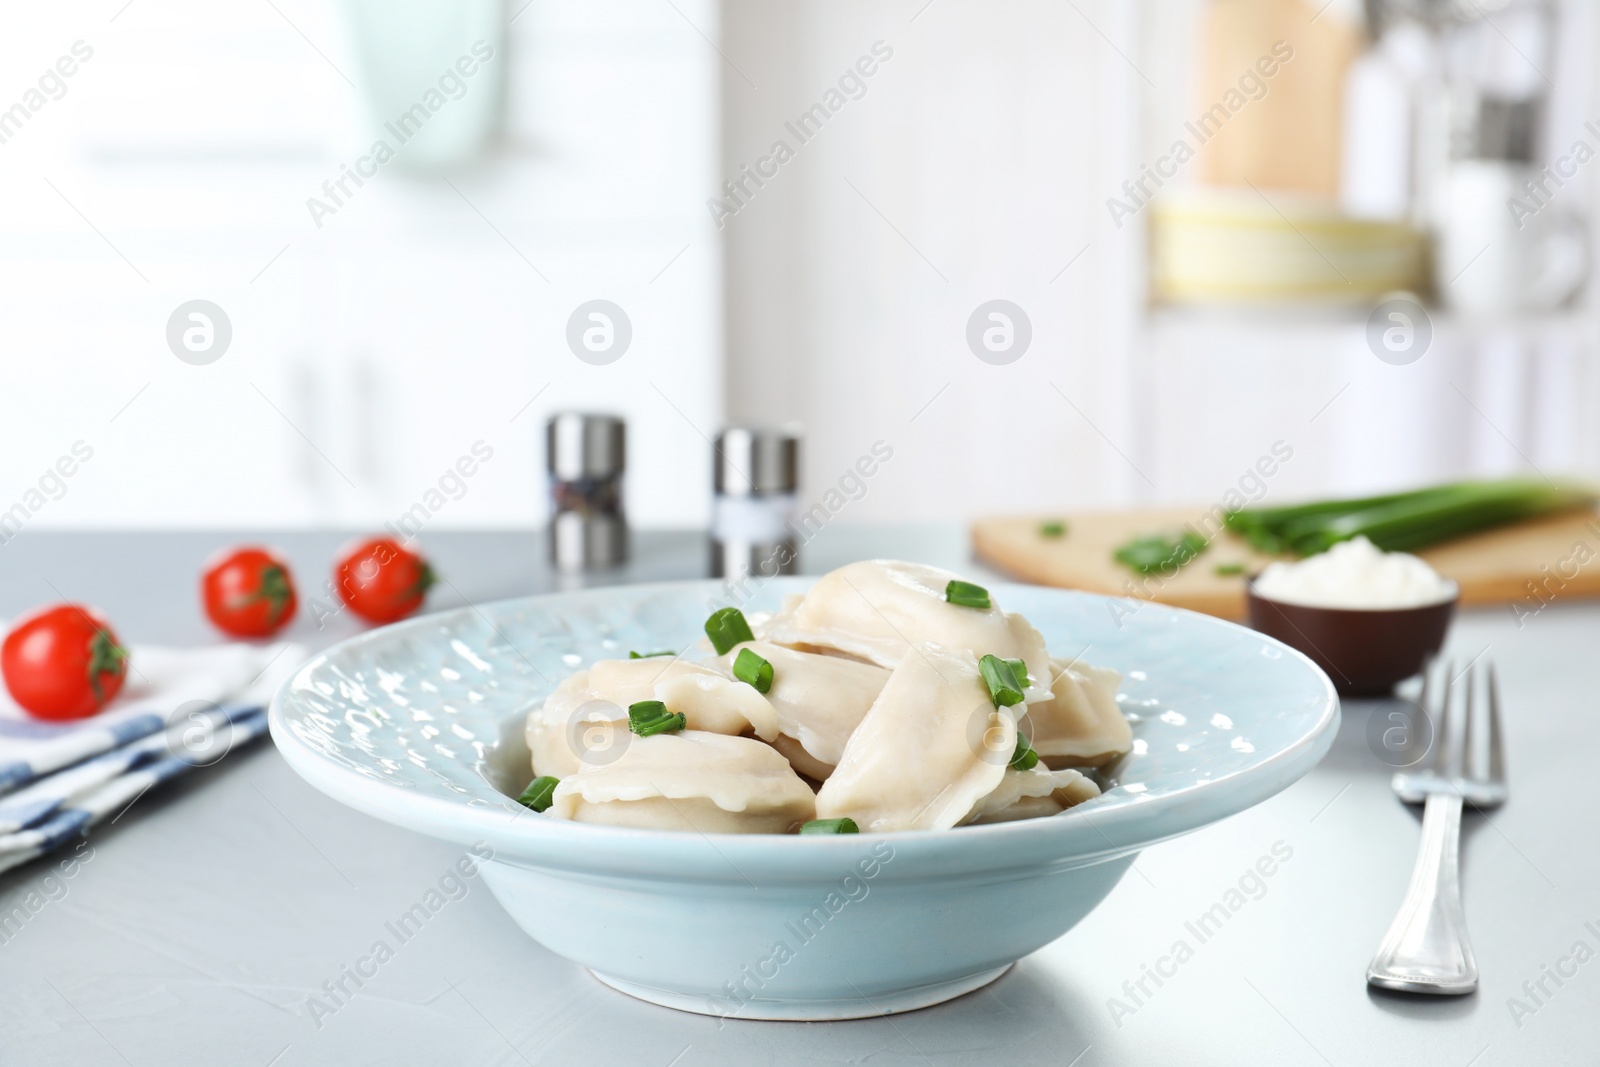 Photo of Plate of tasty dumplings served with green onion on table